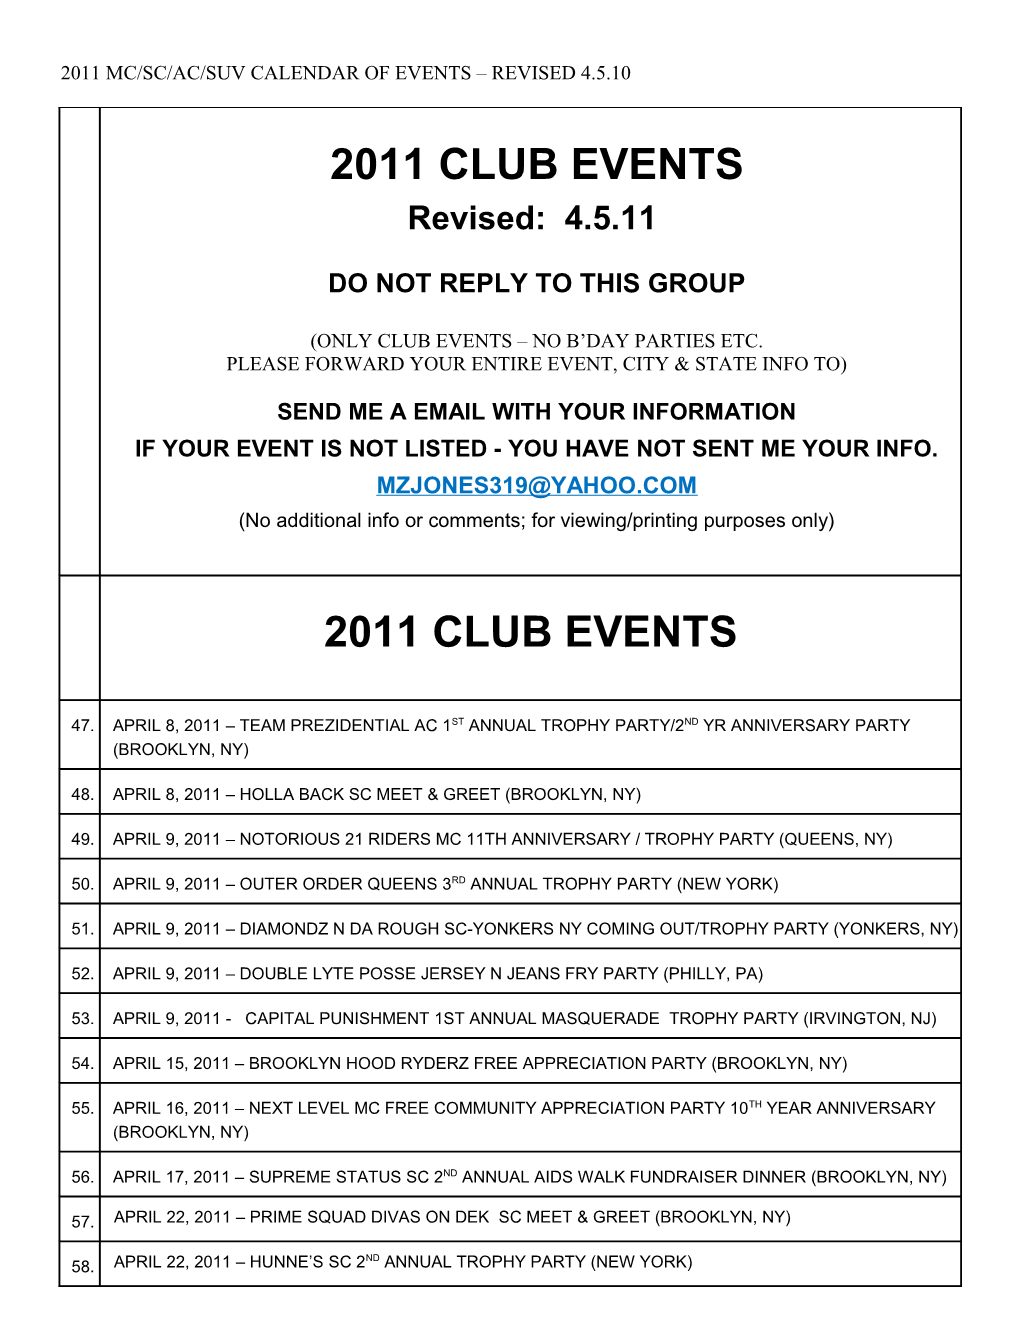 2008/2009 Club Events Do Not Reply to This Groupplease Do Not Reply to This Email Group